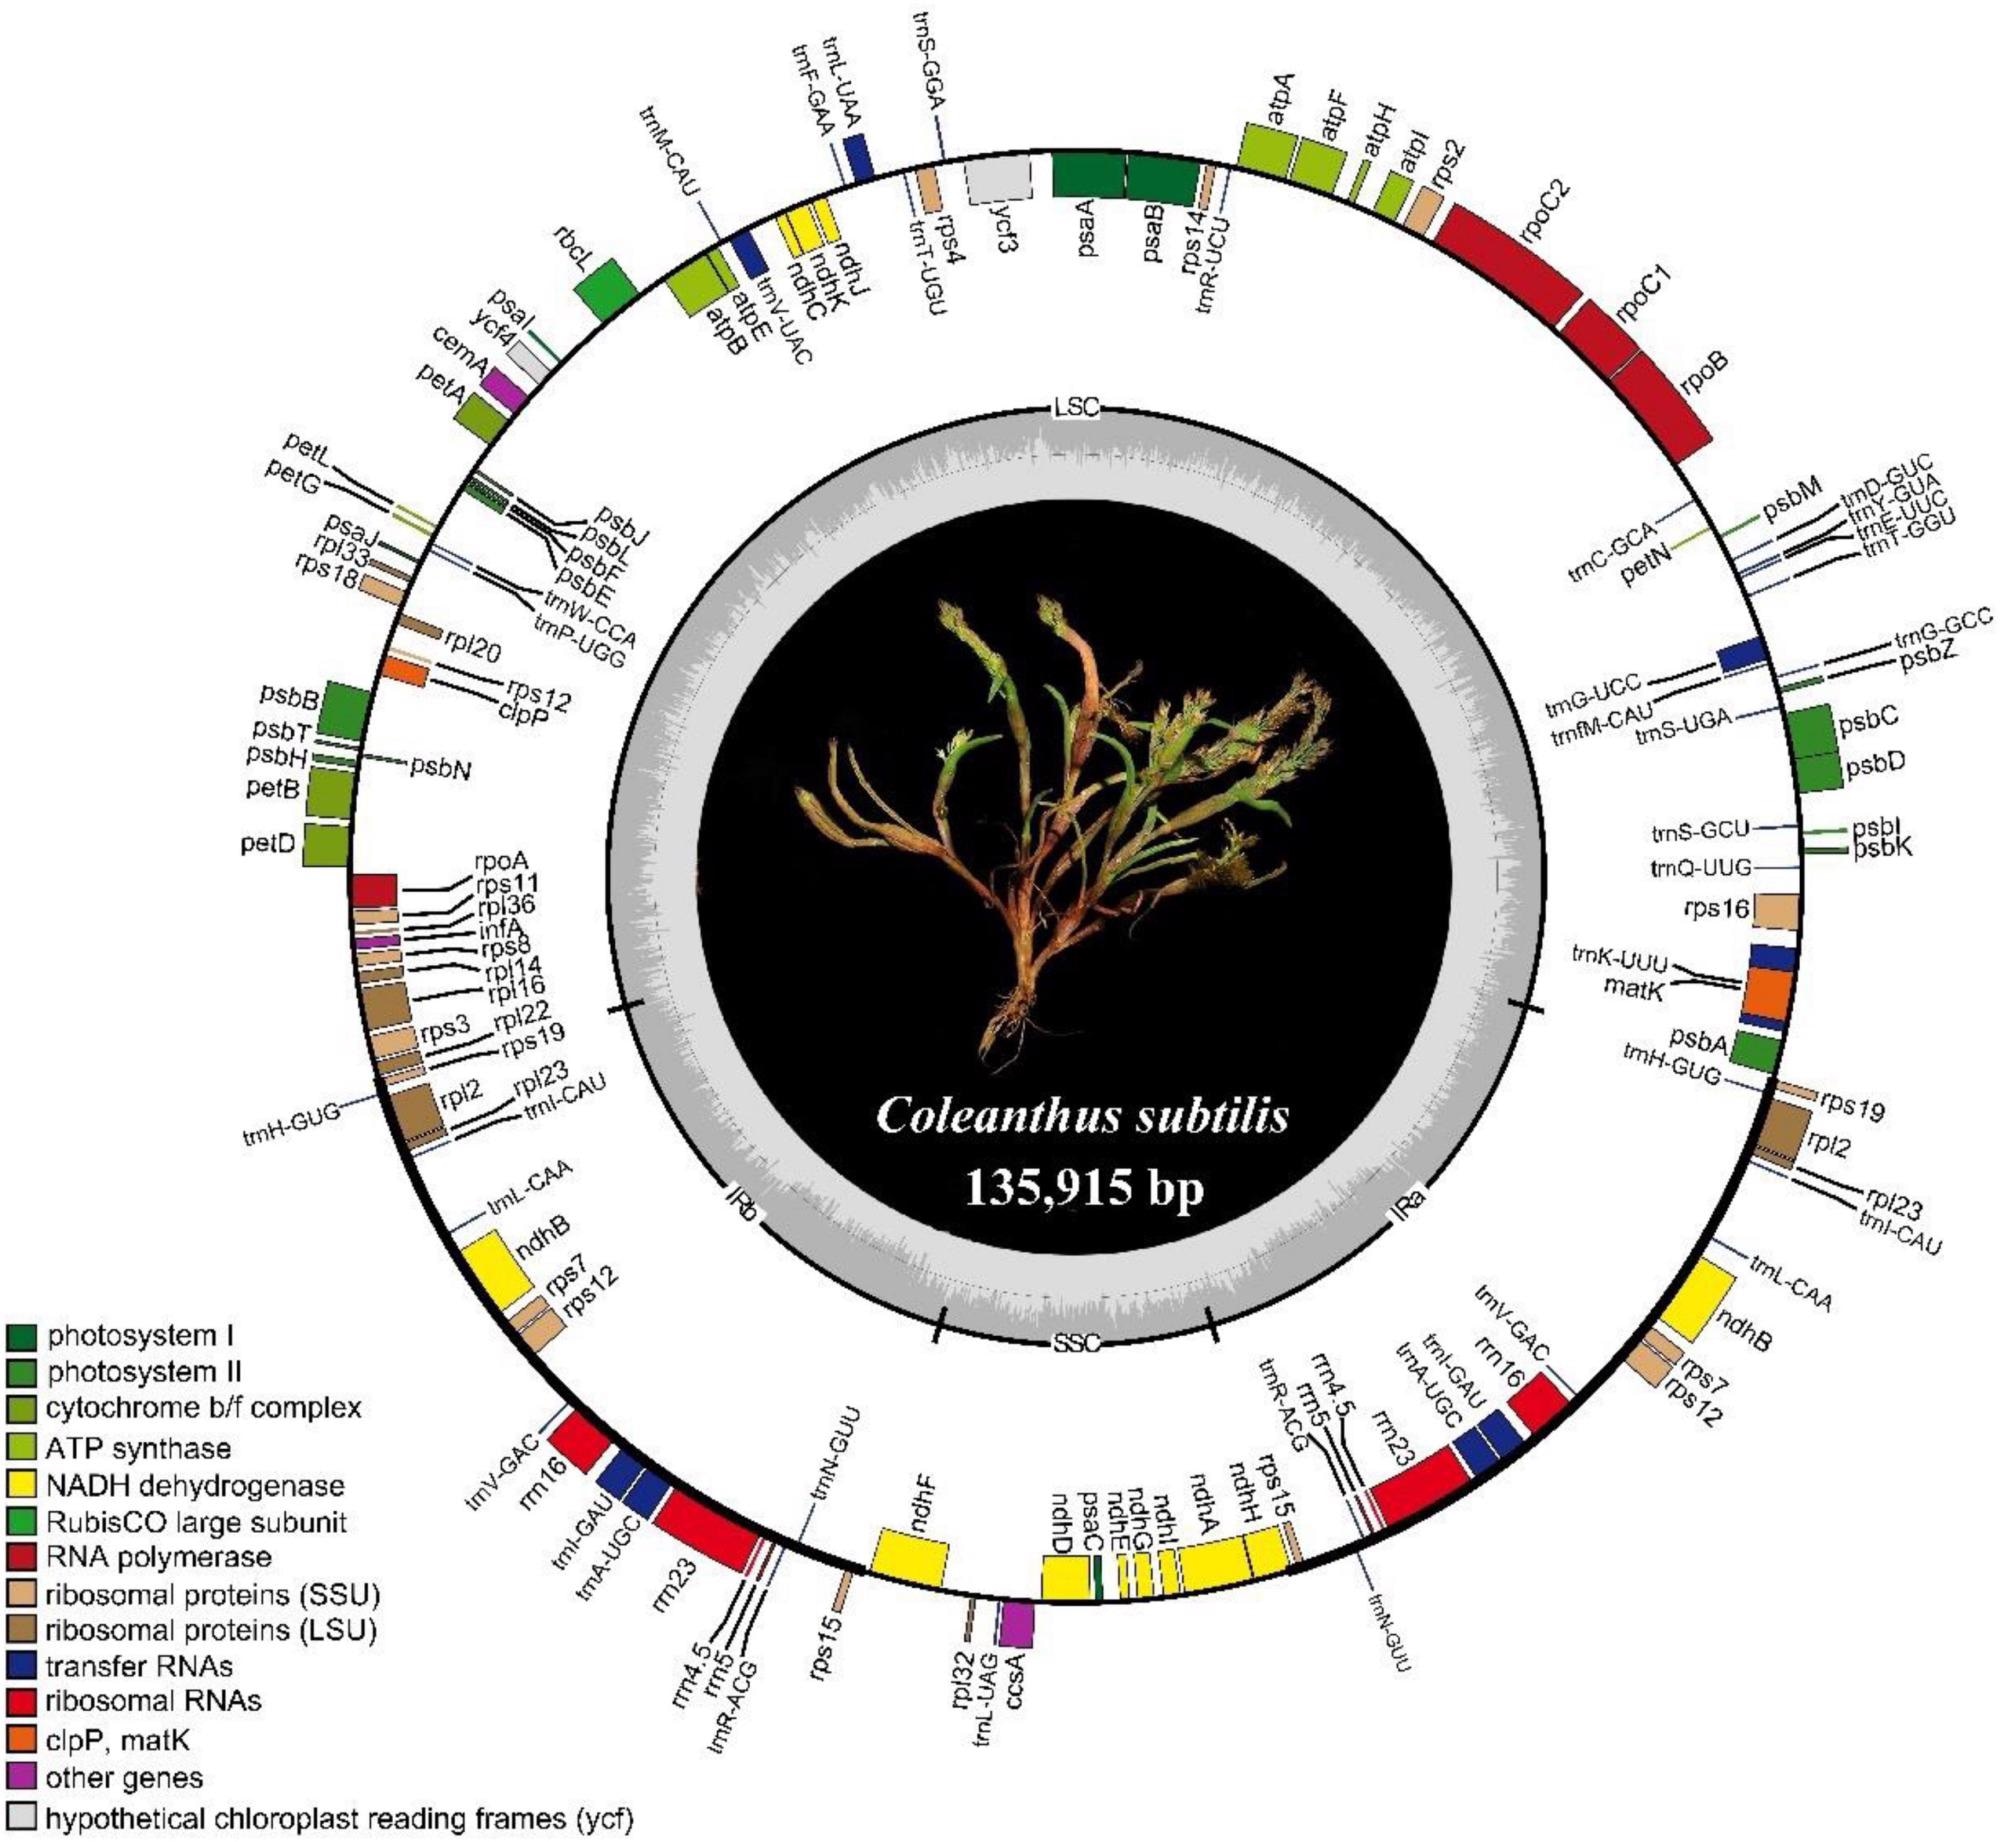 Research sheds light on first chloroplast genome report for Coleanthus subtilis